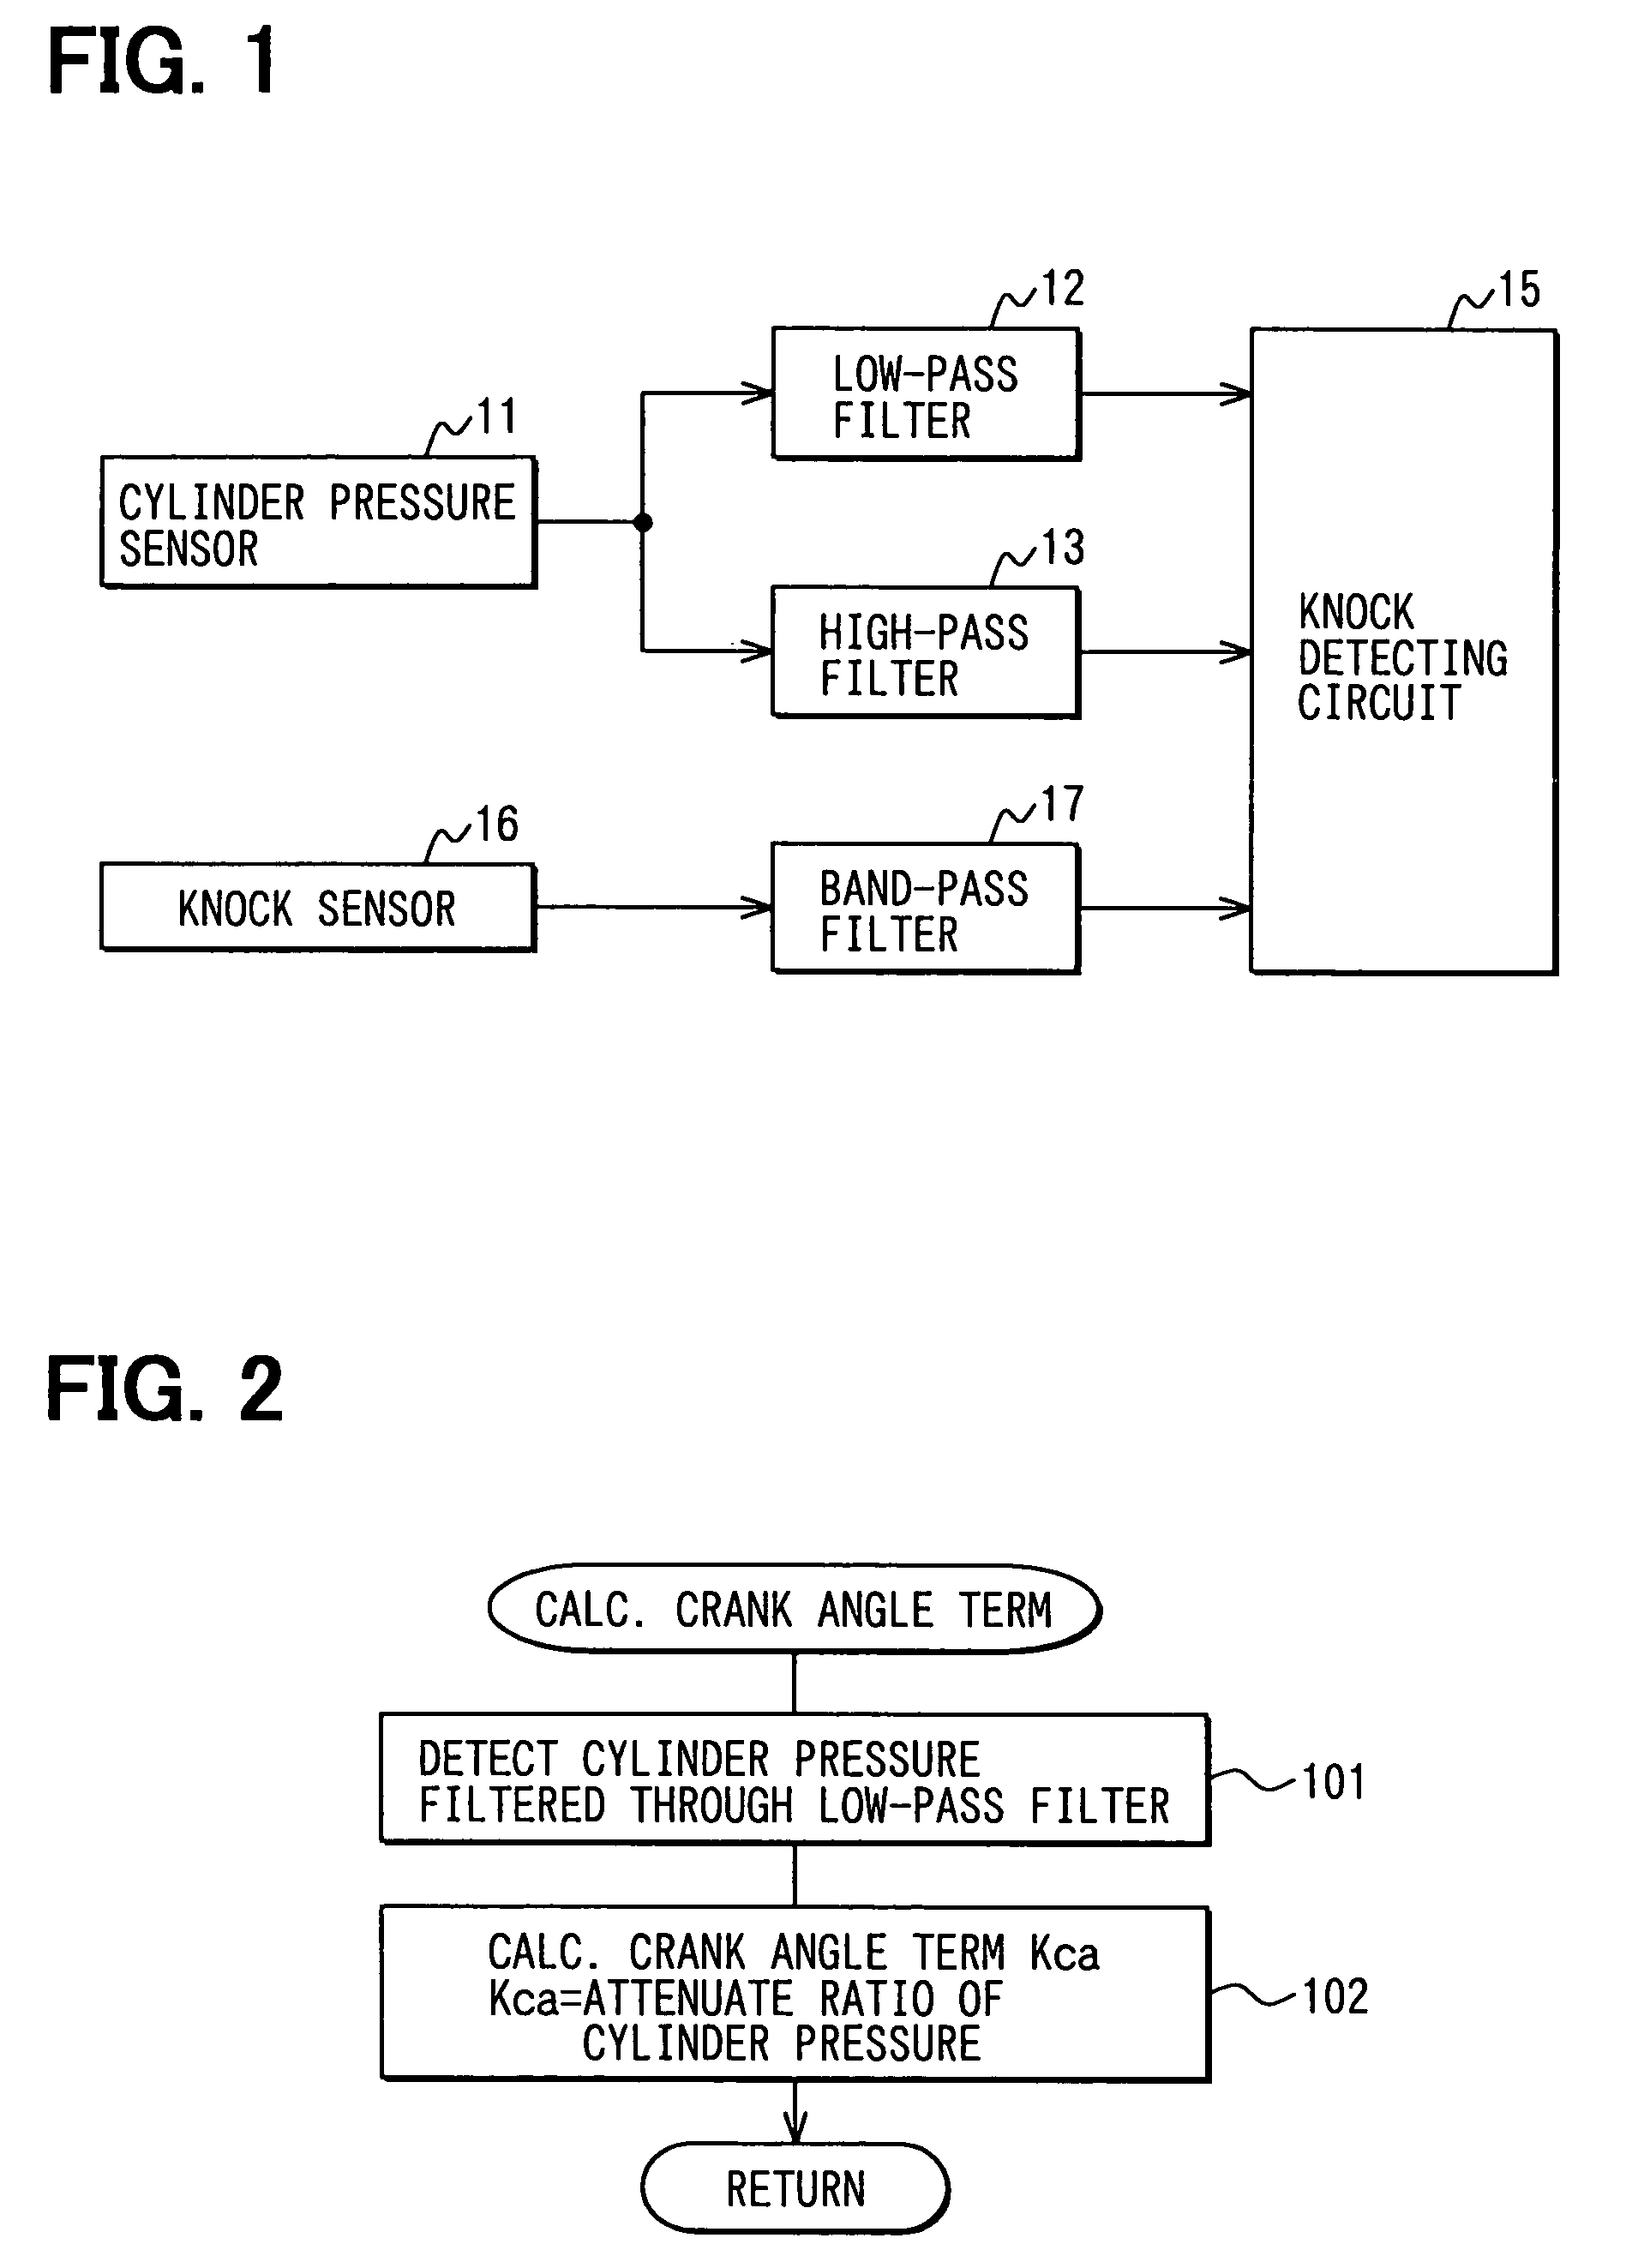 Knock detecting apparatus for internal combustion engine